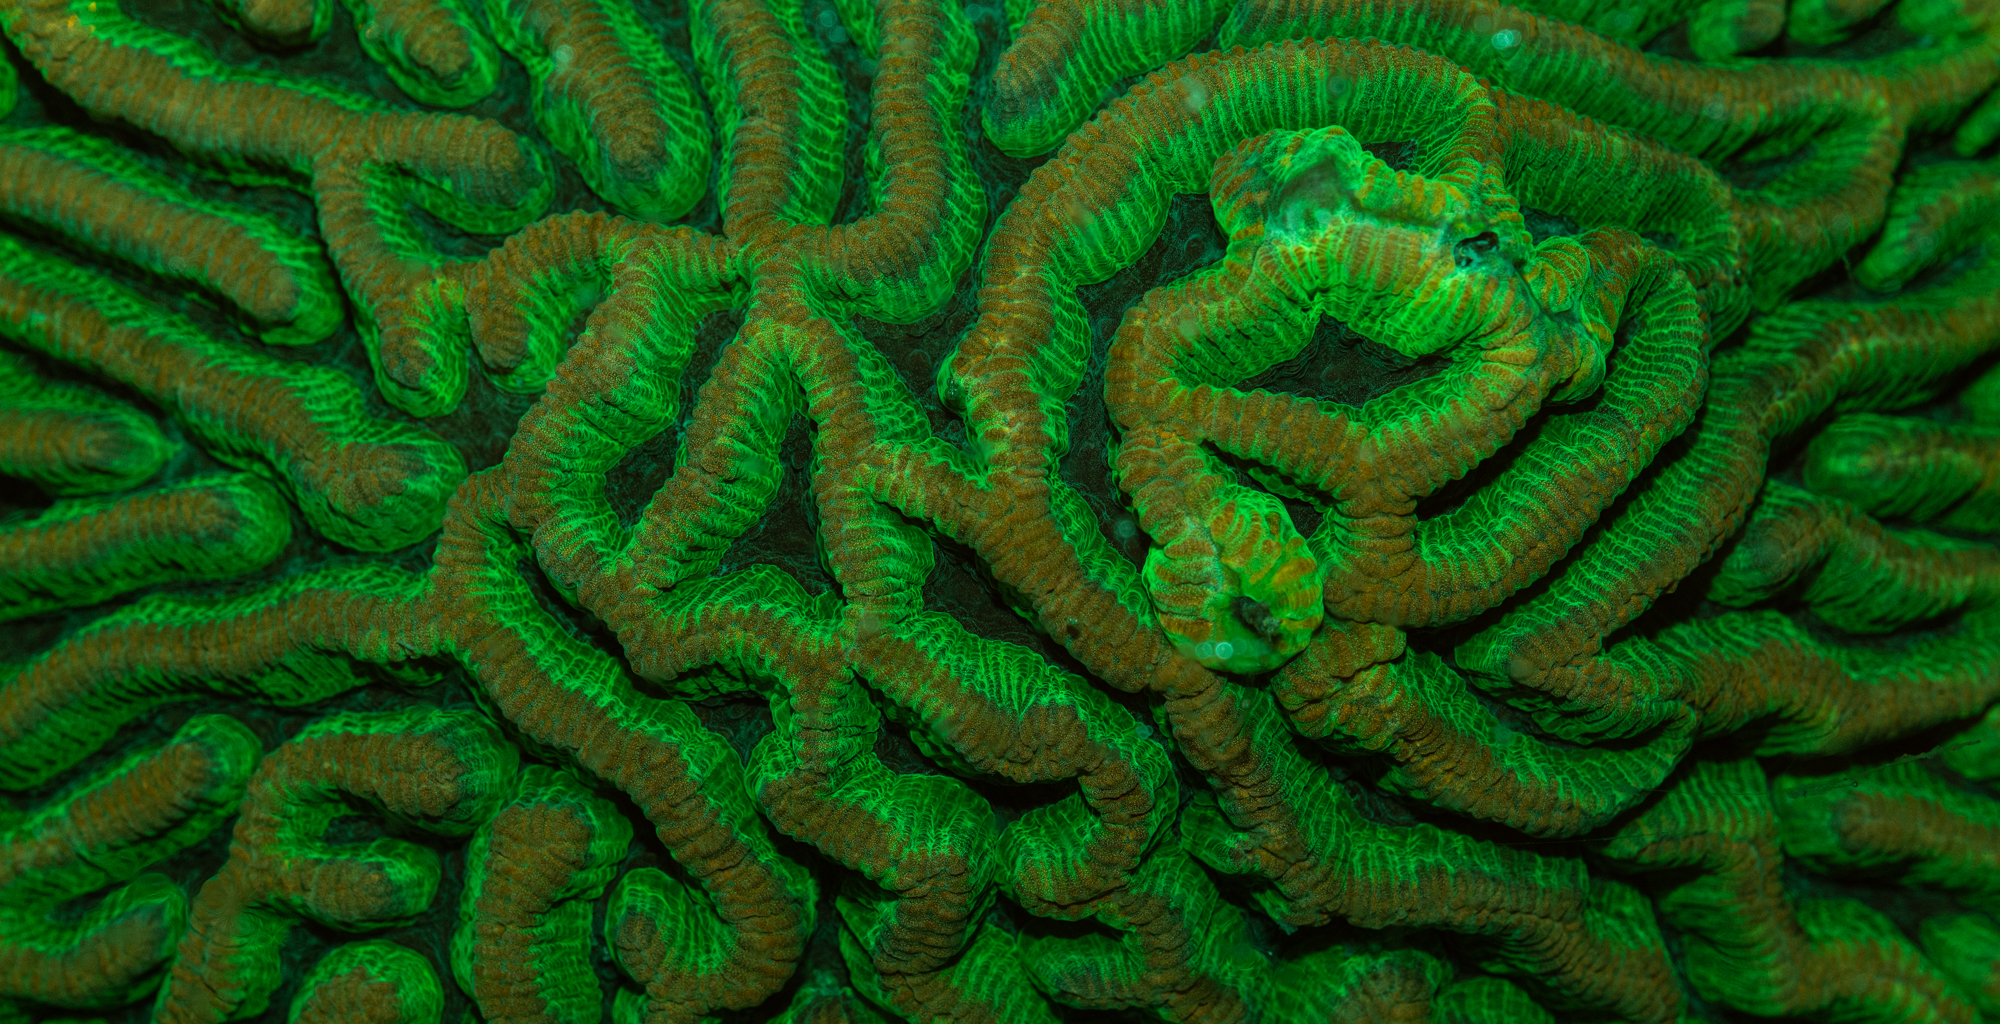 Monday Archives: Fluorescence Photography at MACNA: What is coral fluorescence?